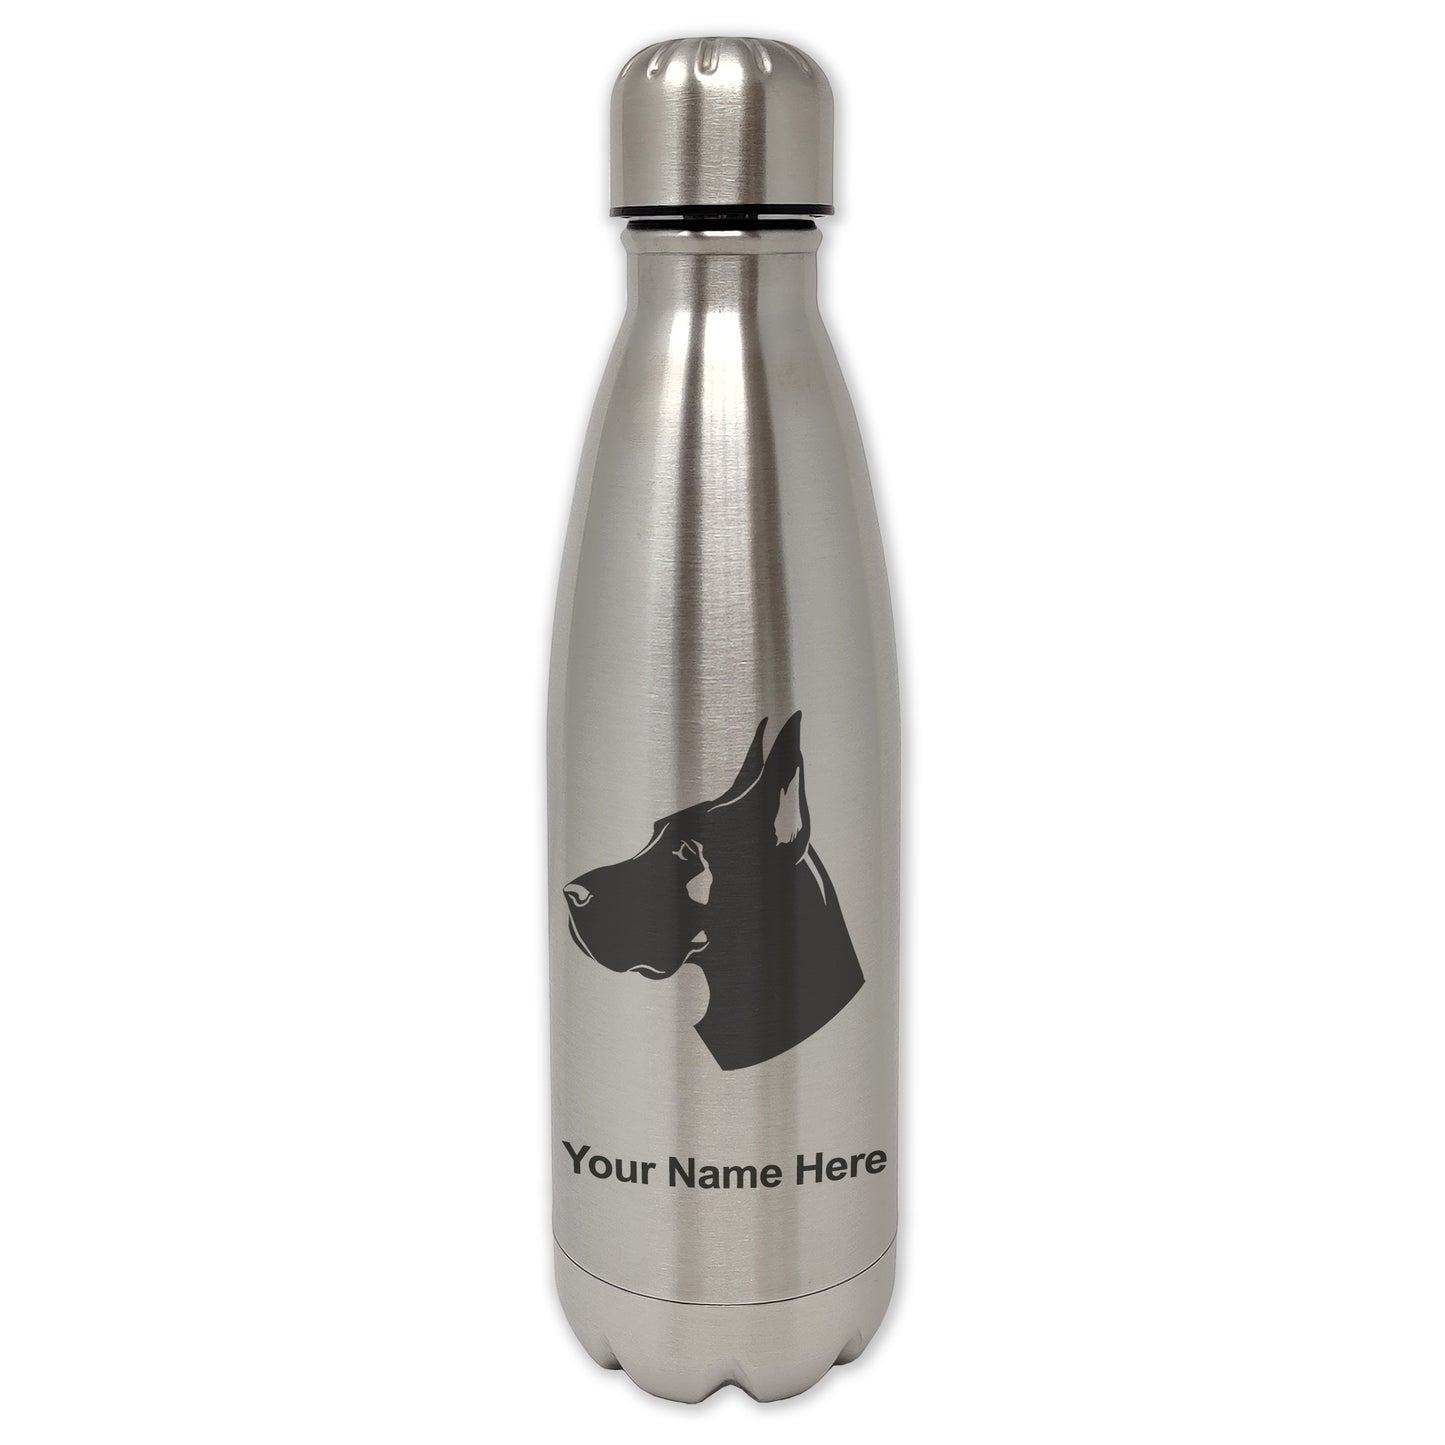 LaserGram Double Wall Water Bottle, Great Dane Dog, Personalized Engraving Included